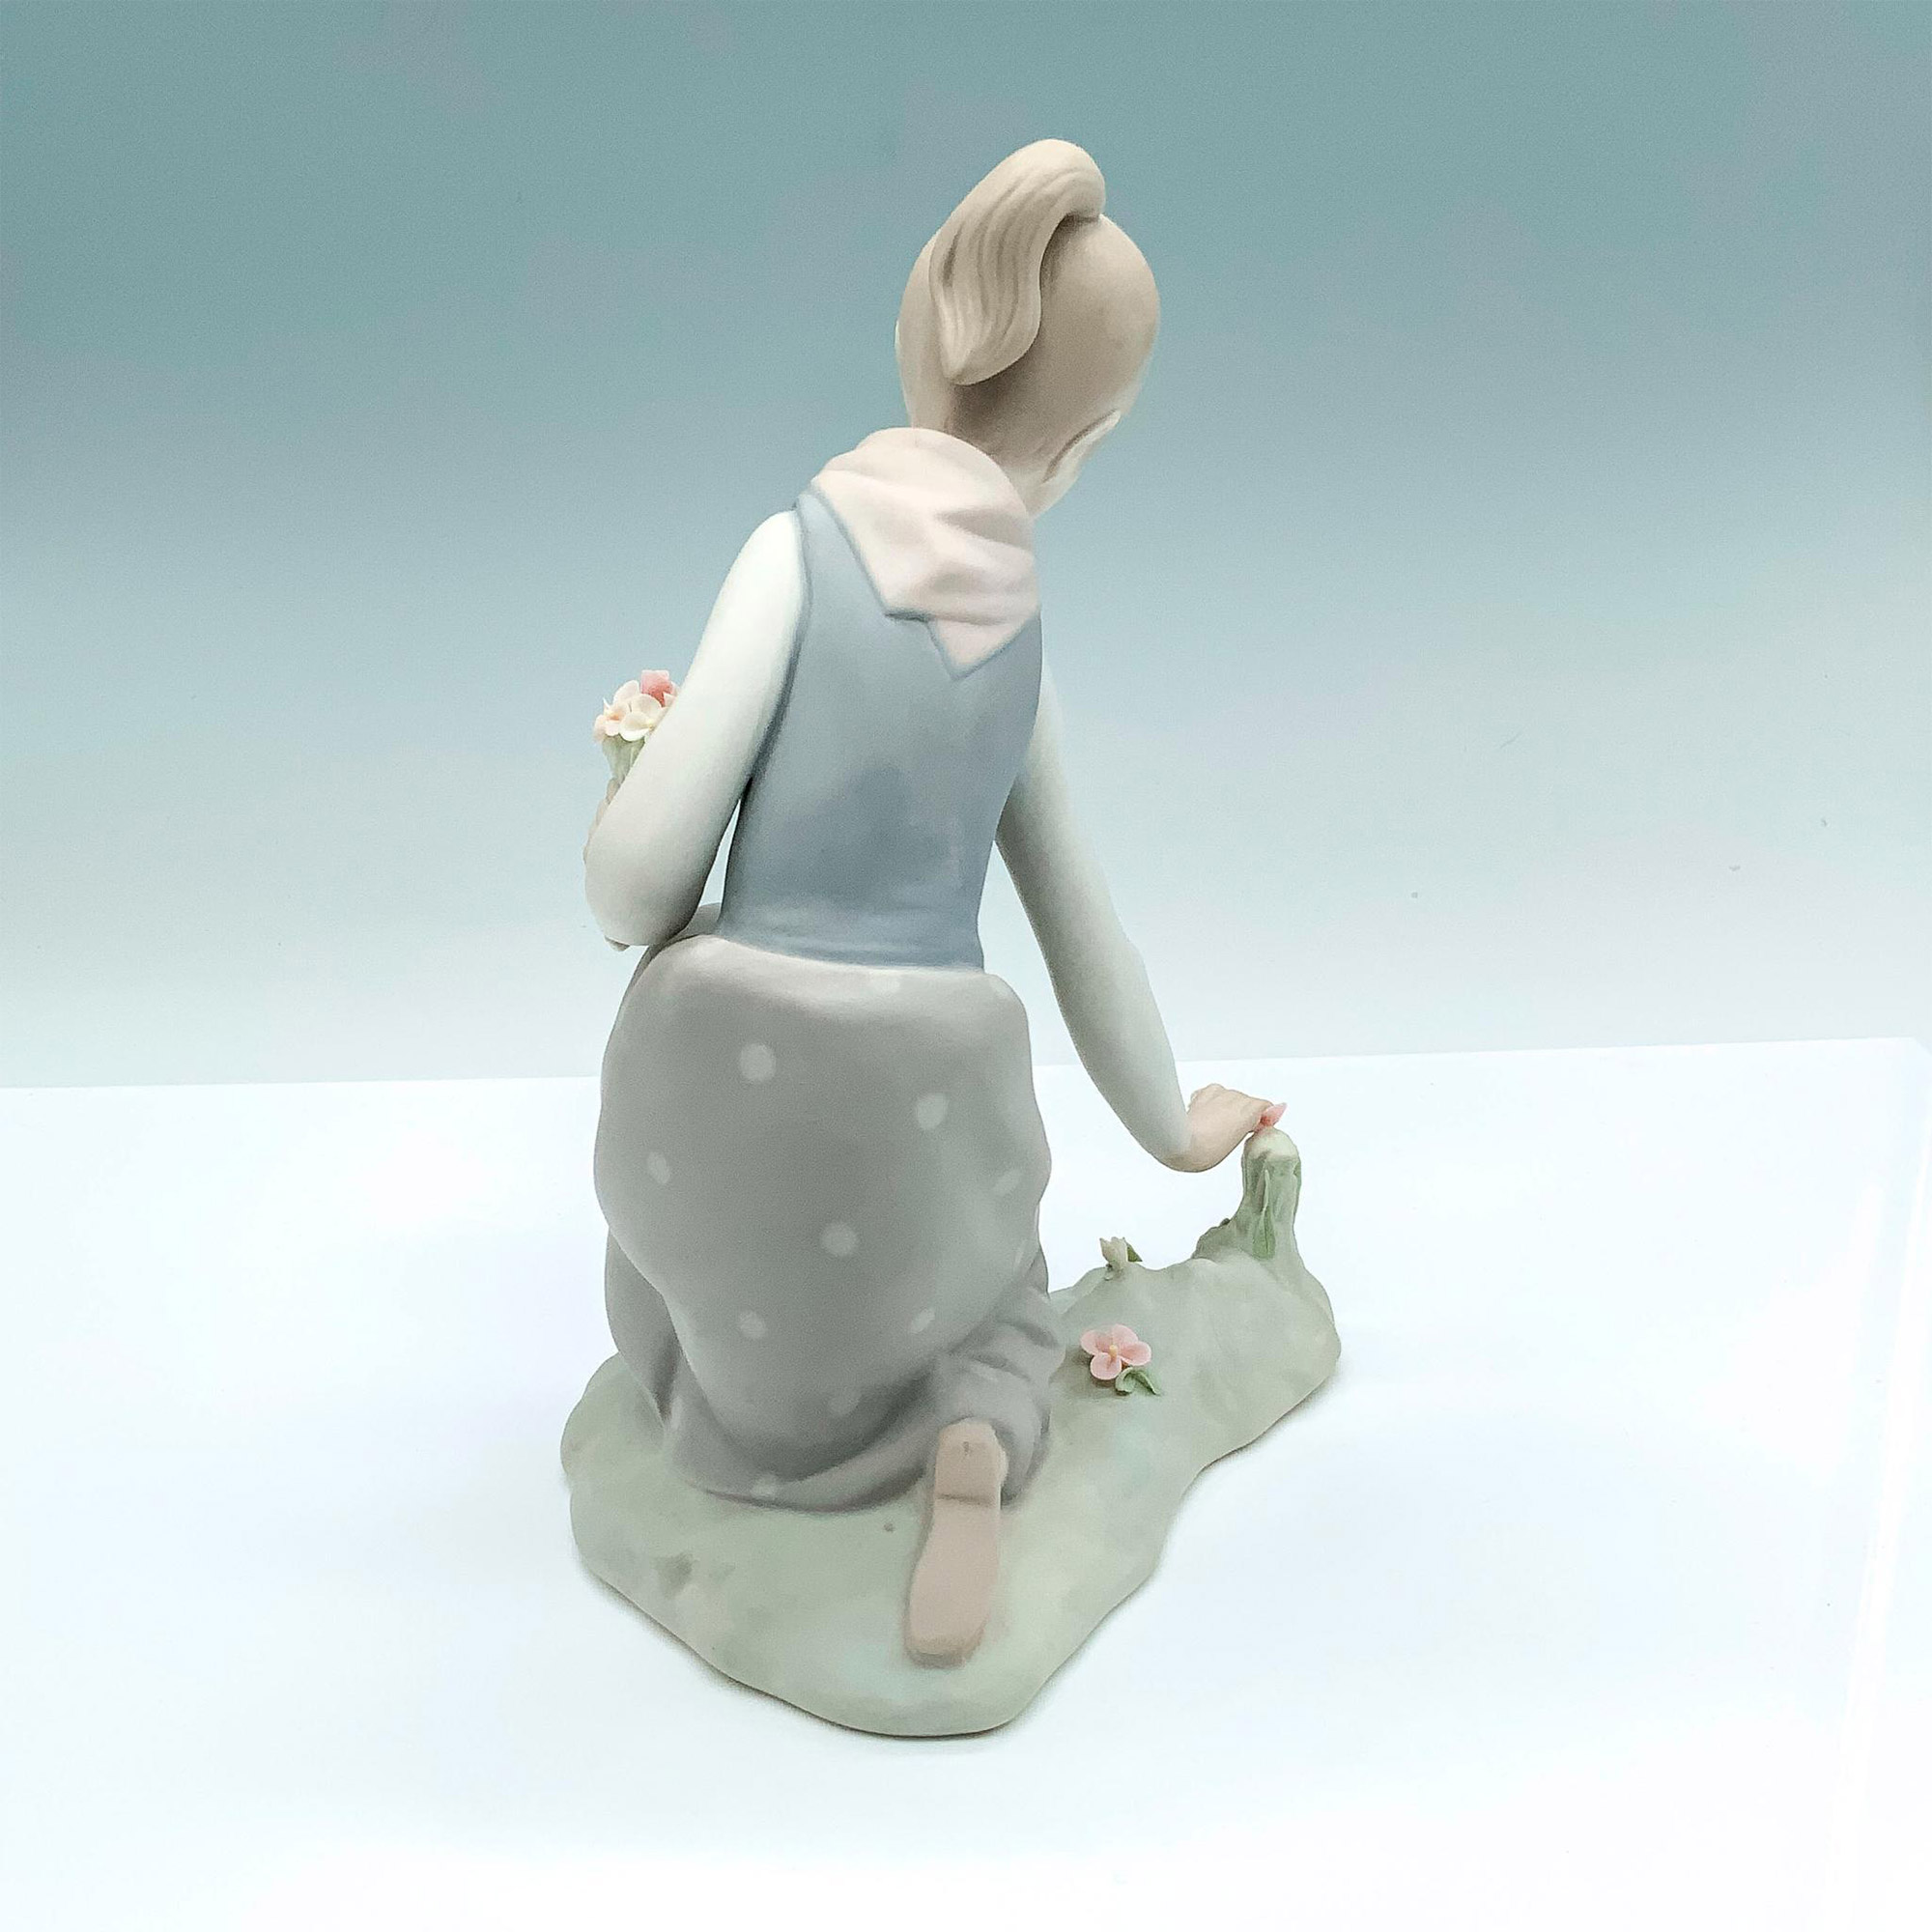 Girl With Flowers 1011172 - Lladro Porcelain Figurine - Image 4 of 5